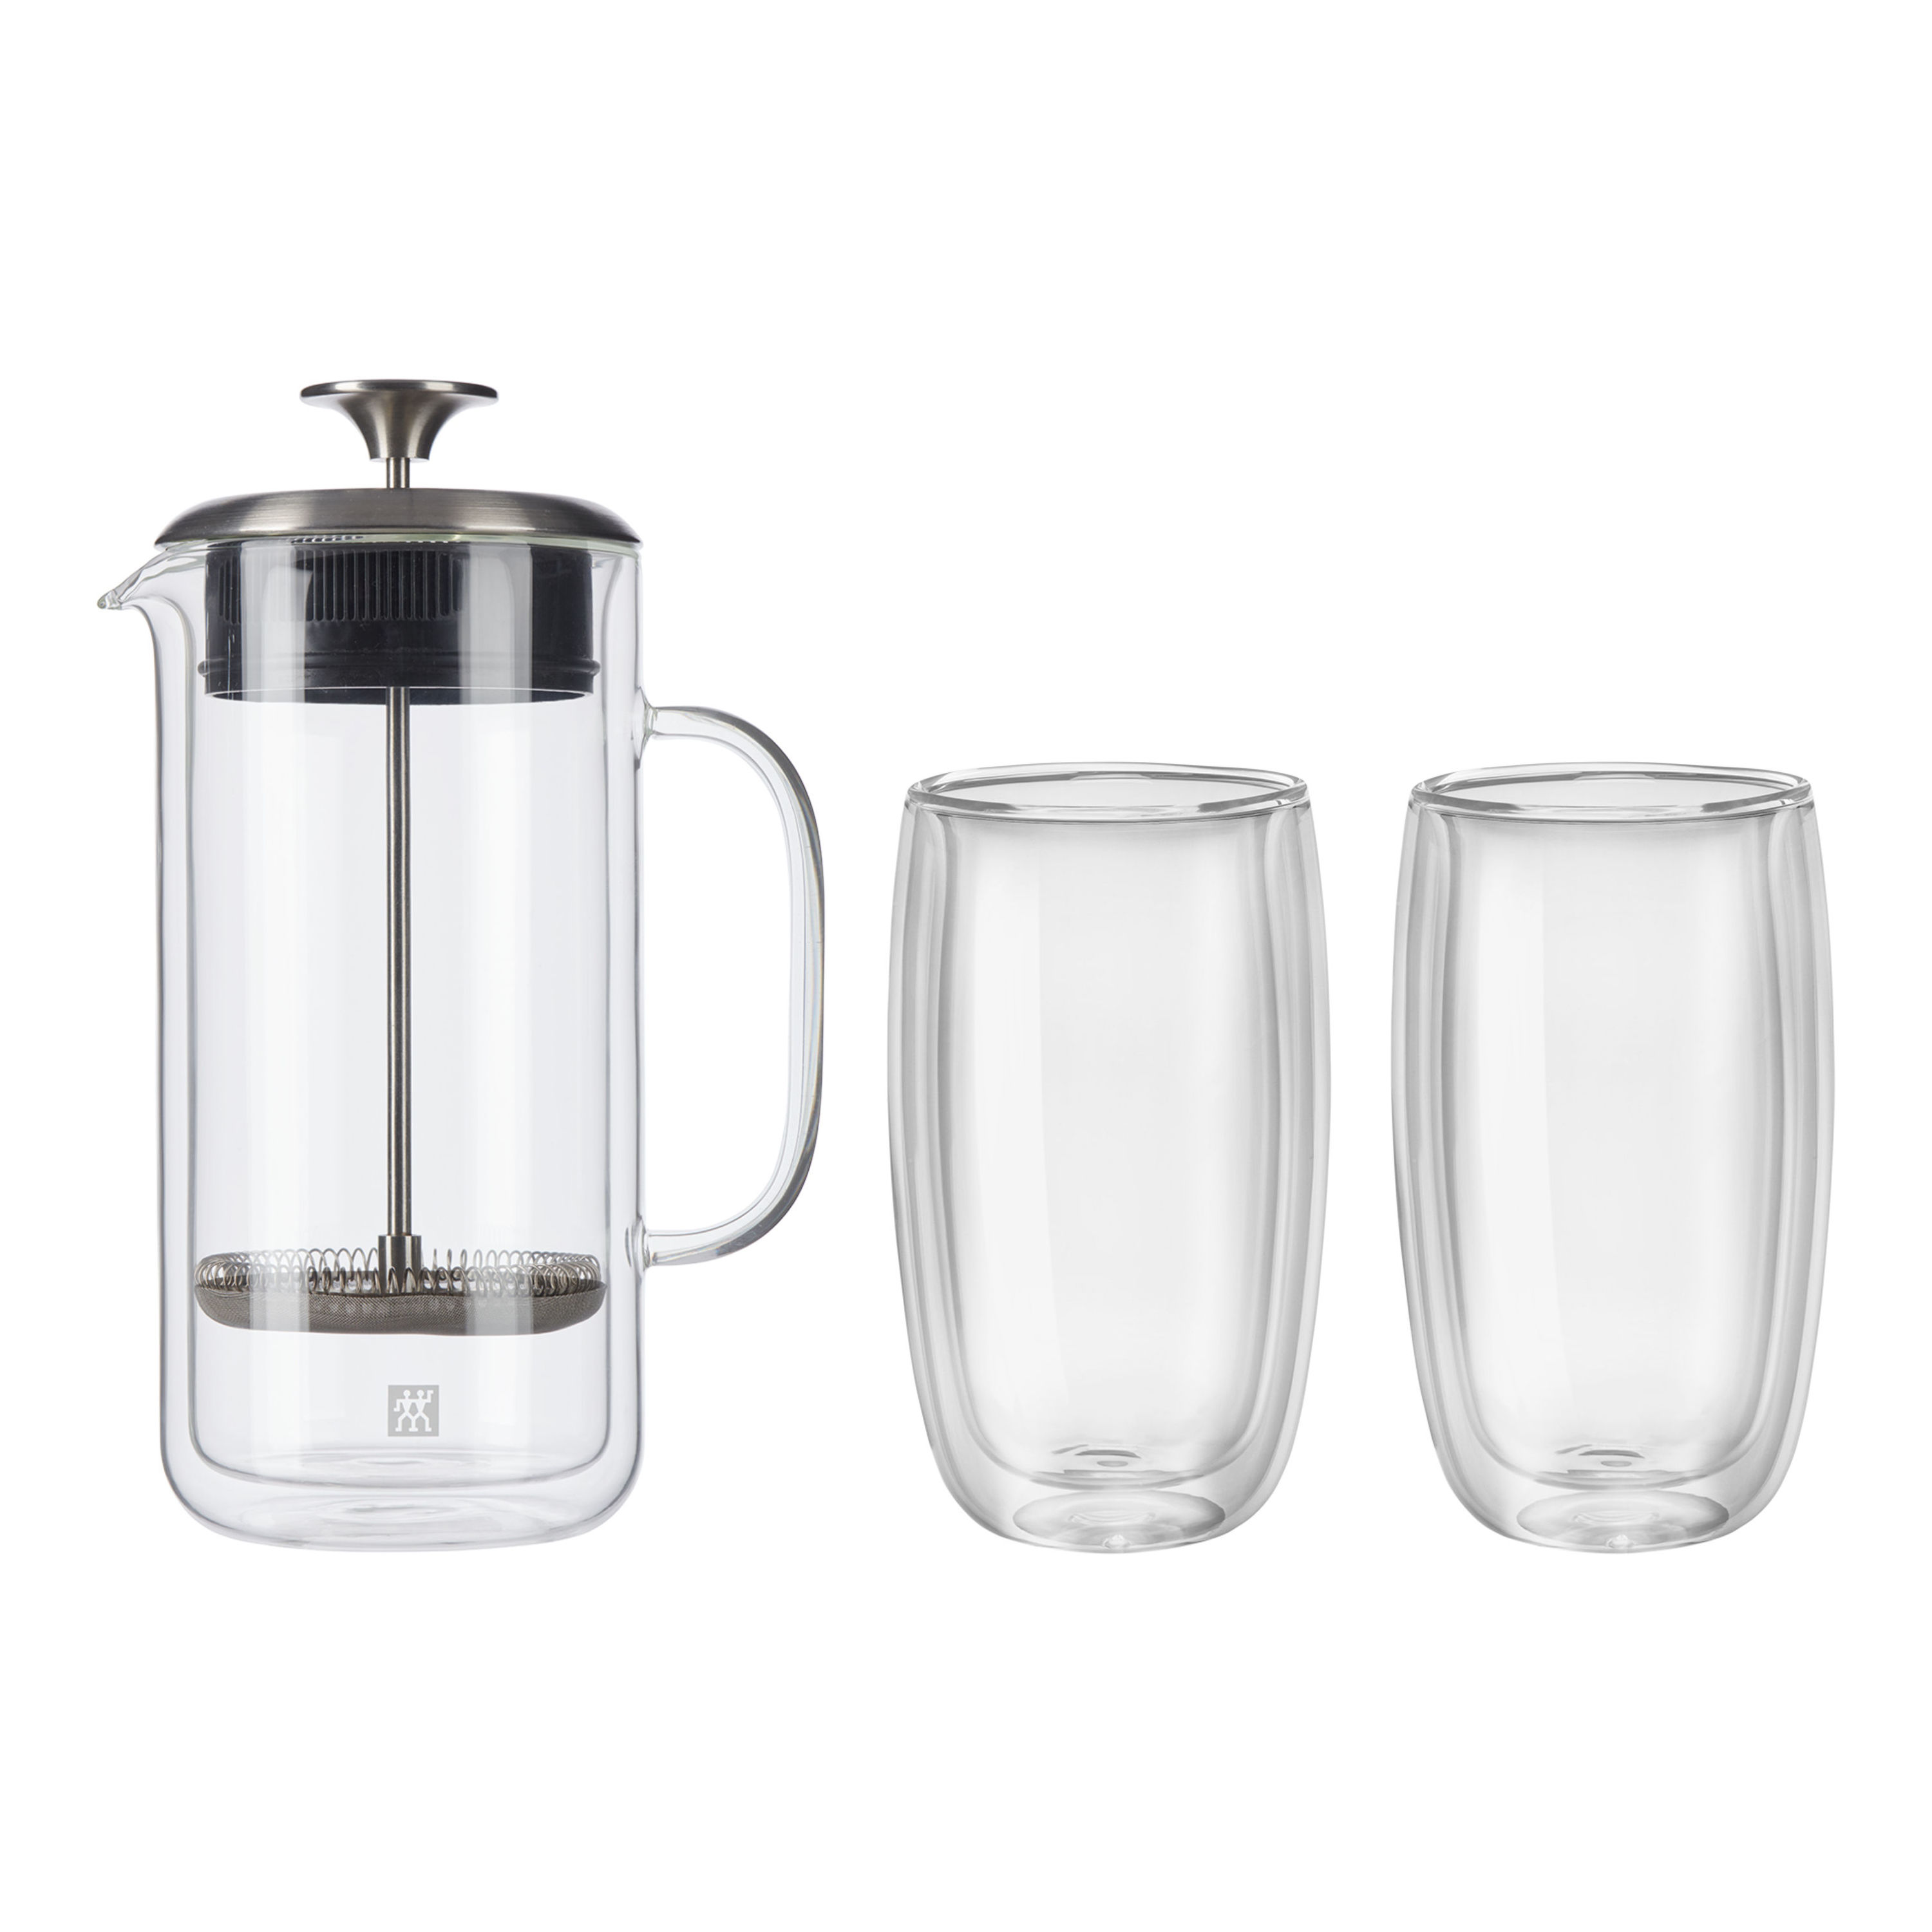 ZWILLING Sorrento Double-Wall Coffee and Beverage 9-pc Glassware